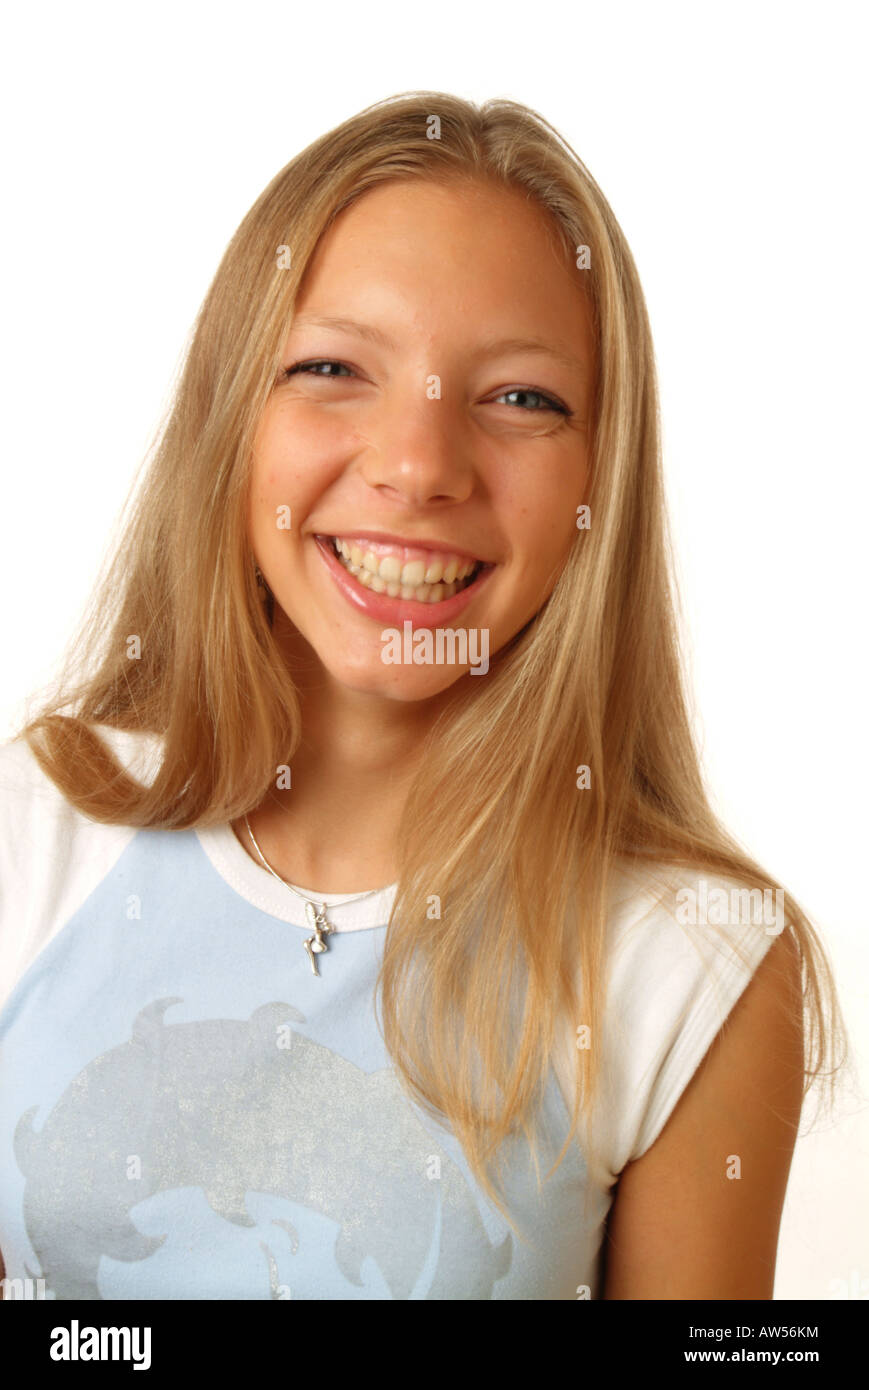 Blond young woman. Teenager. Girl. Laughing. Stock Photo